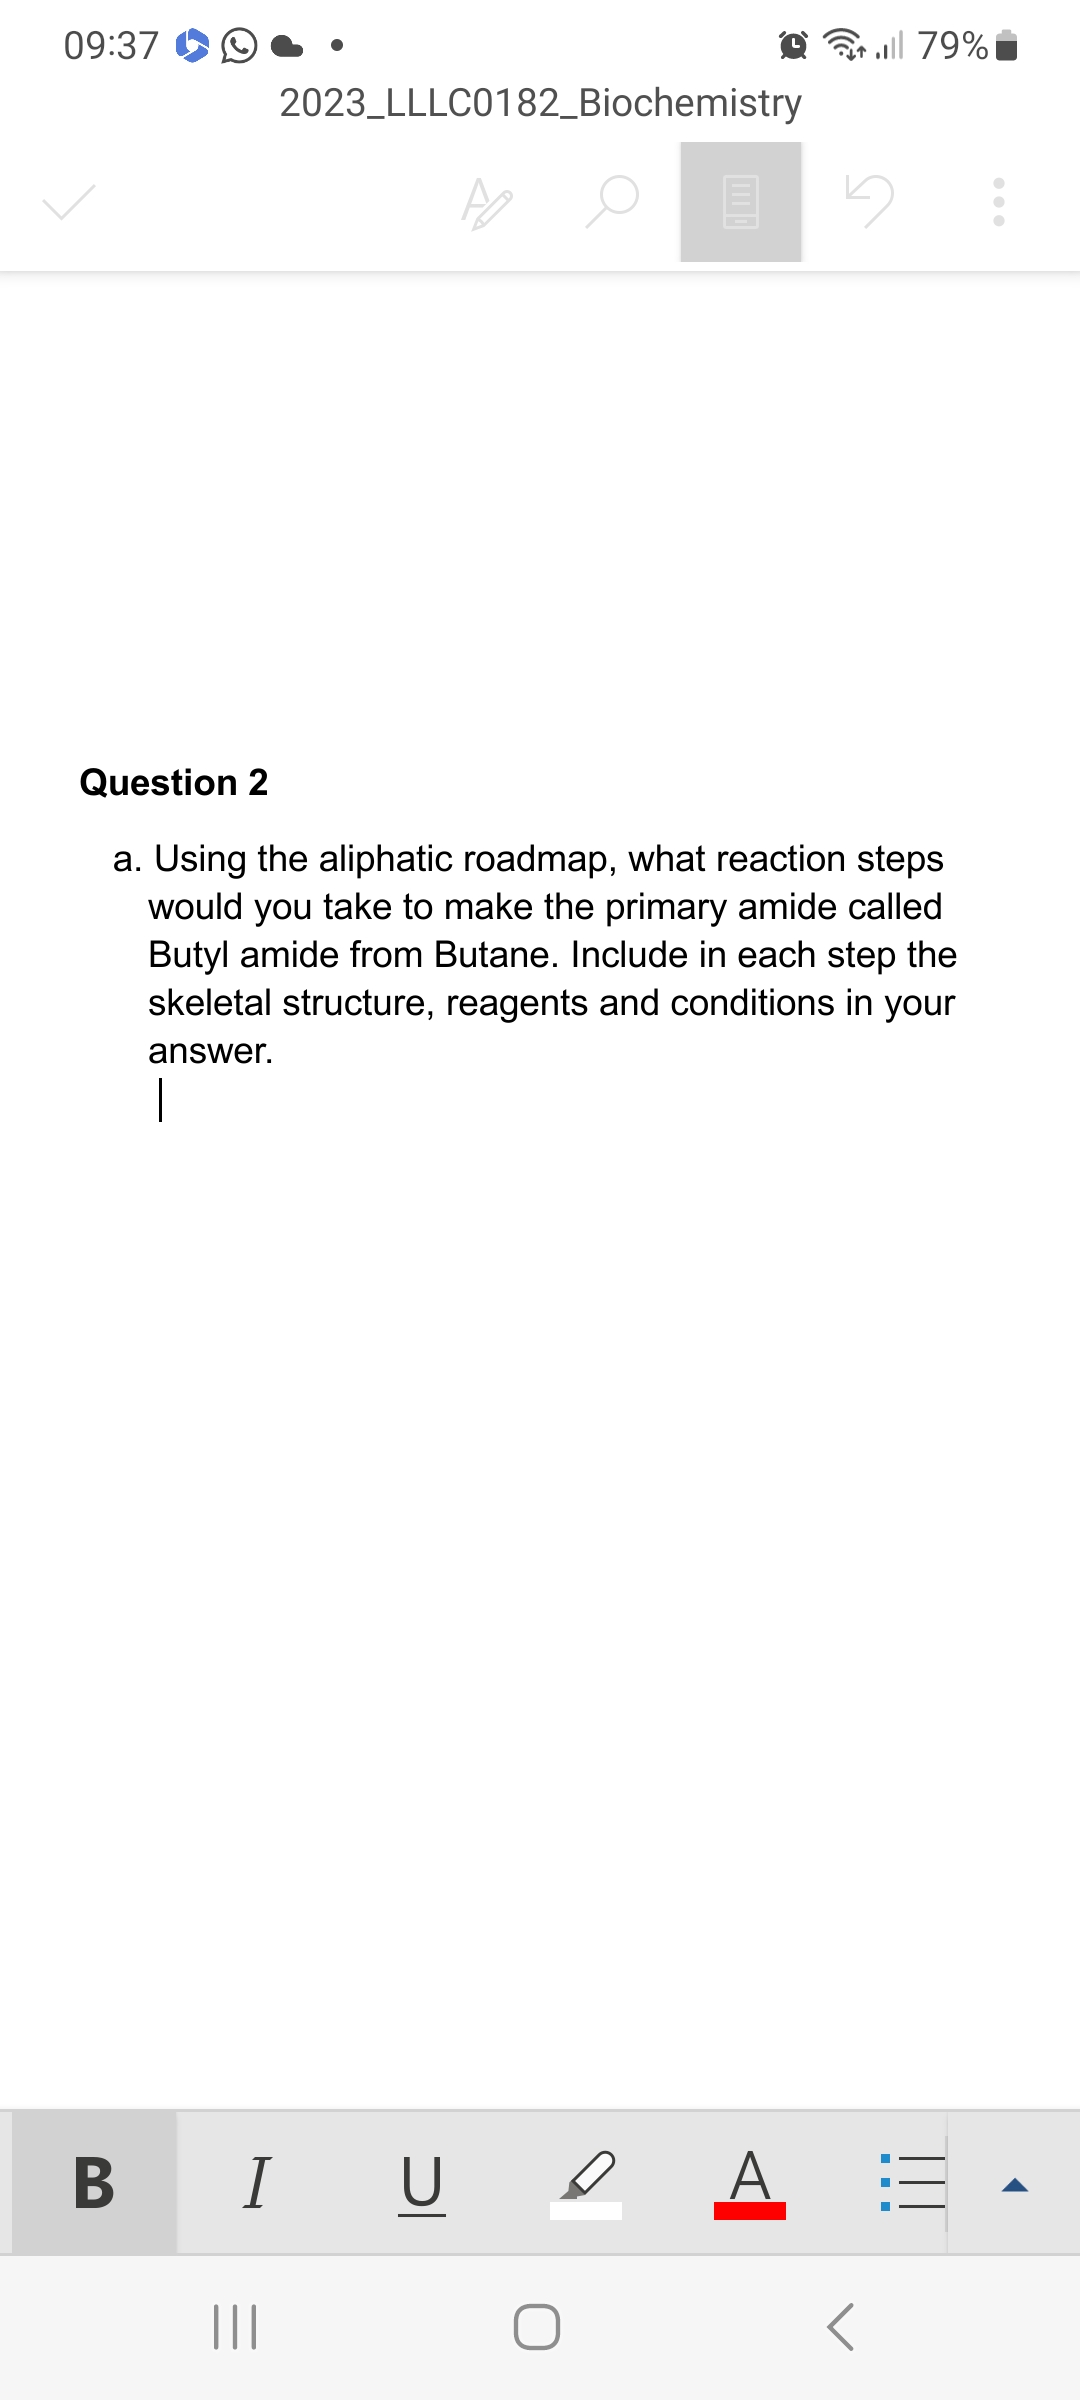 09:37
2023 LLLC0182_Biochemistry
B
Question 2
a. Using the aliphatic roadmap, what reaction steps
would you take to make the primary amide called
Butyl amide from Butane. Include in each step the
skeletal structure, reagents and conditions in your
answer.
I U
O
..|| 79%
A
- - -
|||